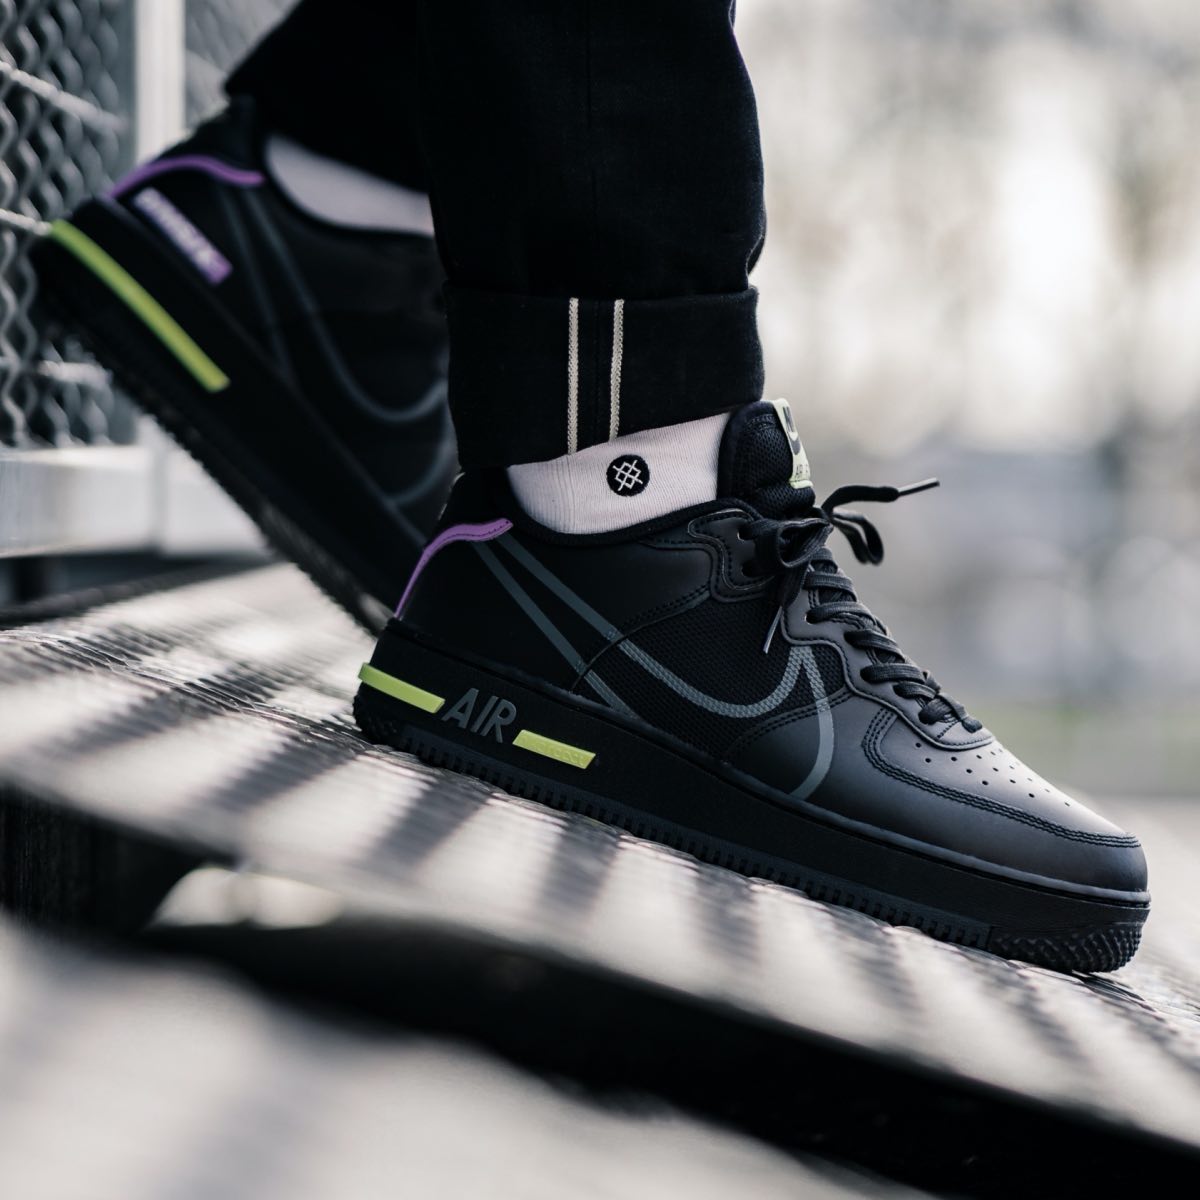 Nike Air Force 1 React D/MS/X
Black / Anthracite